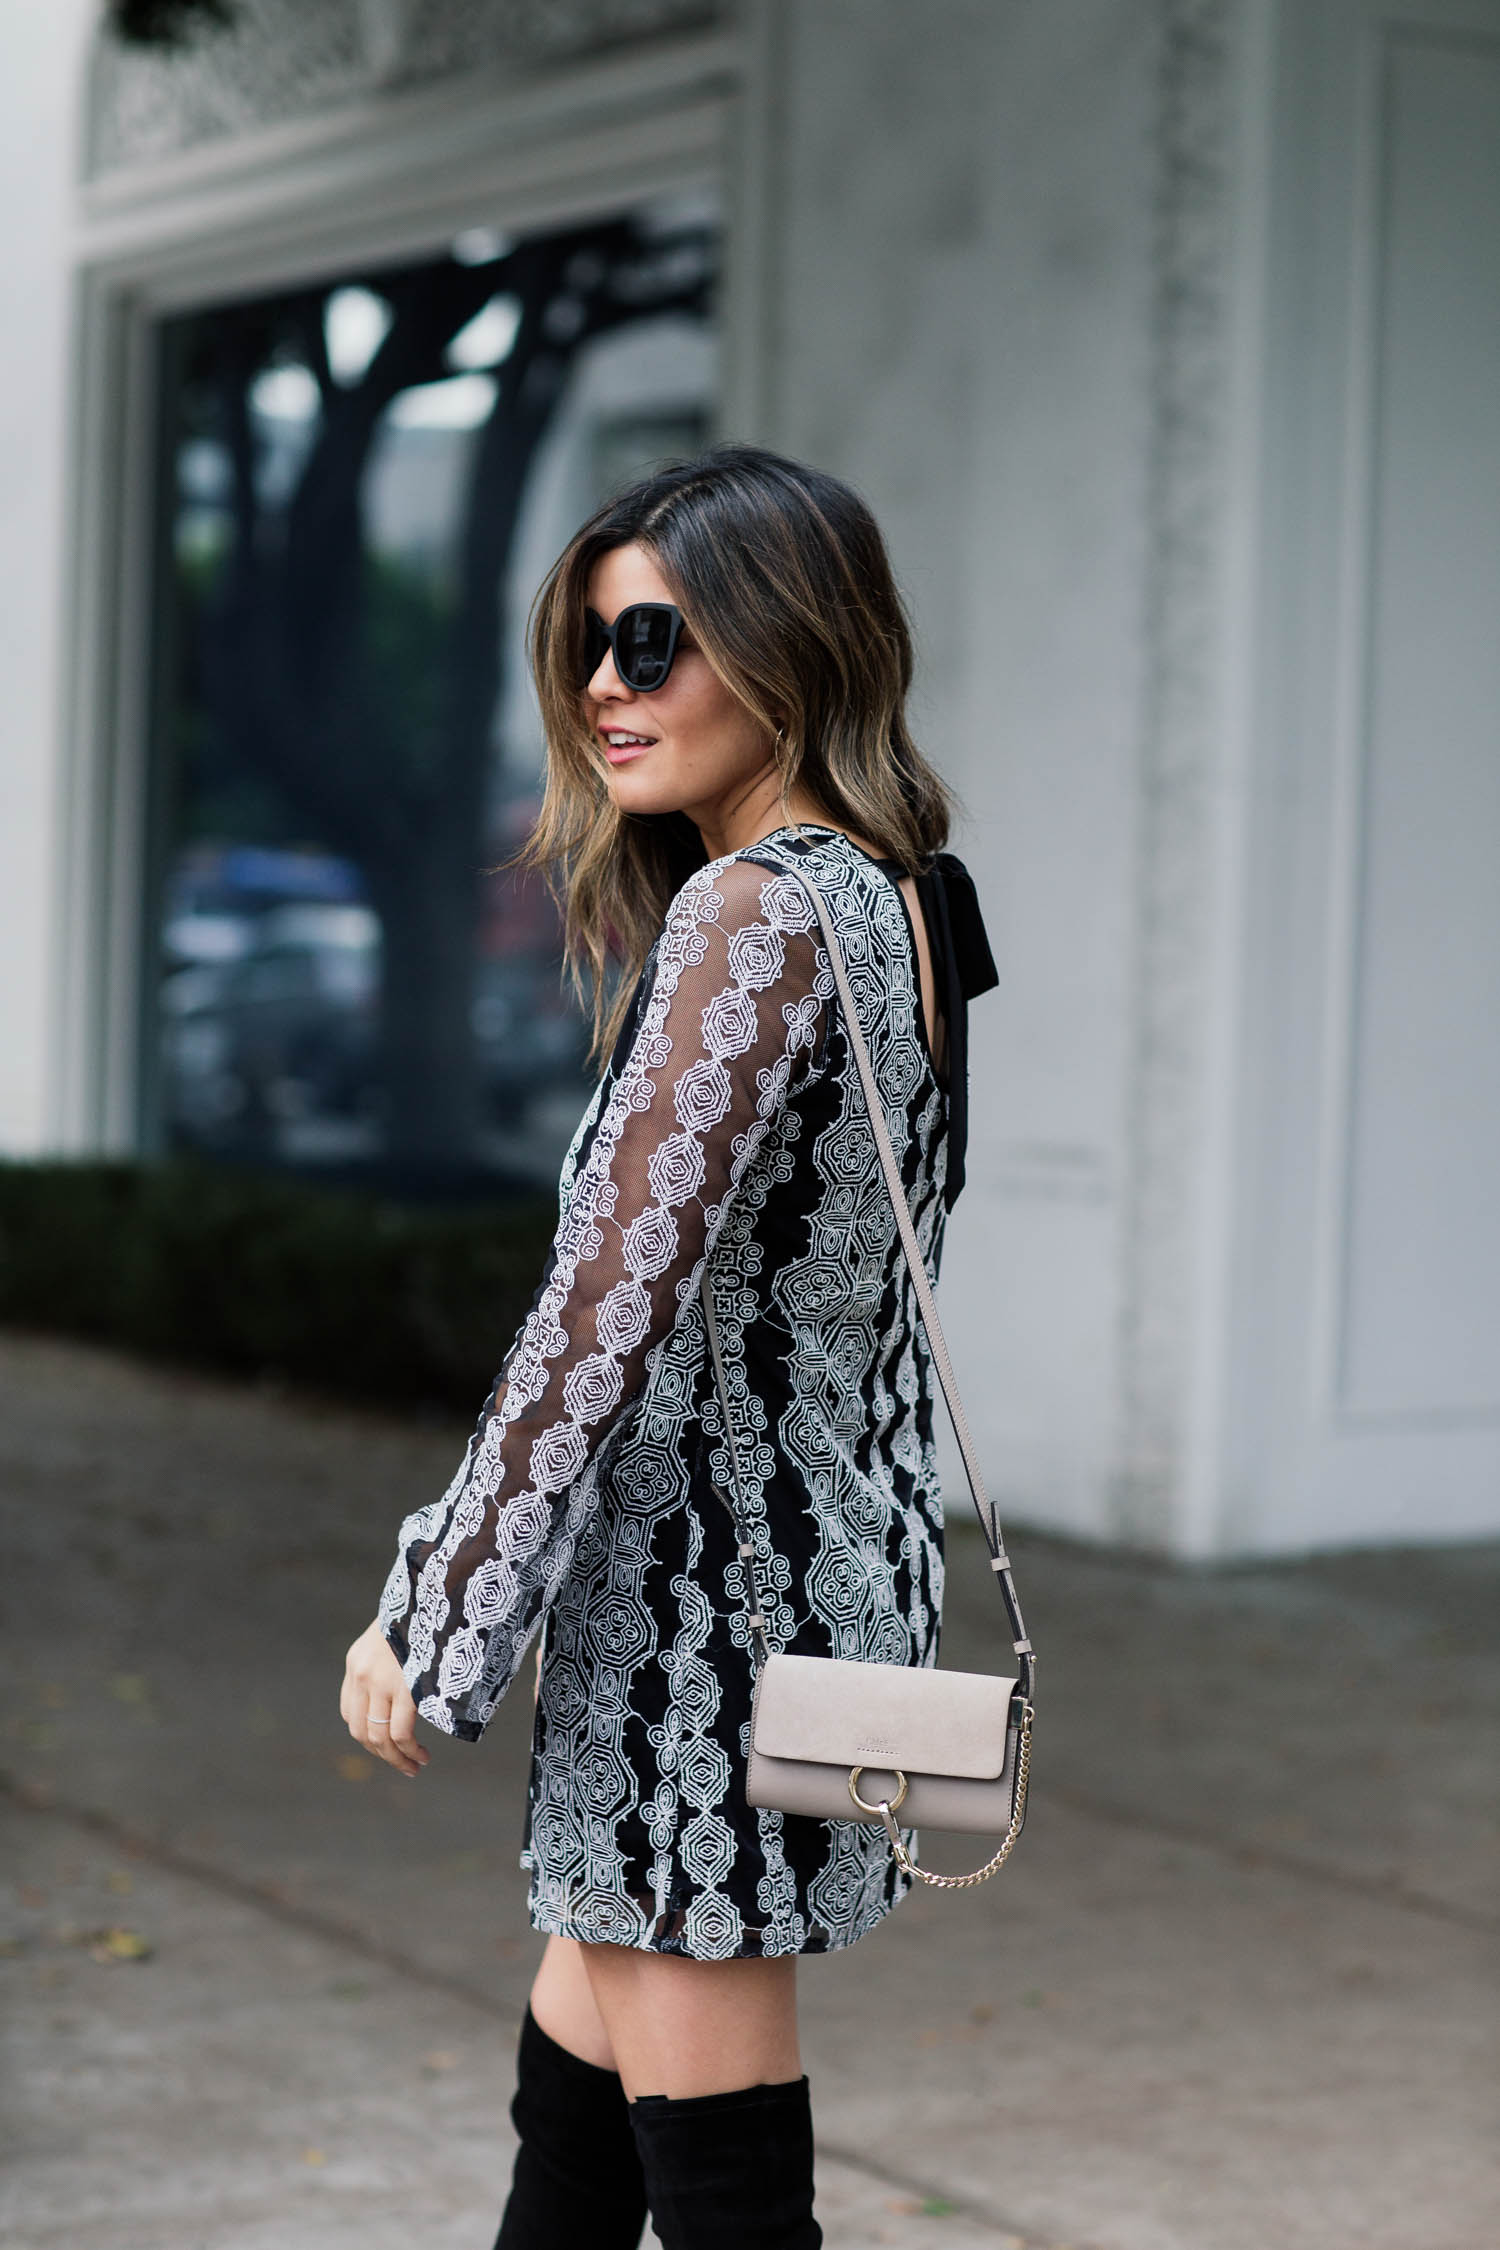 Blogger Sara Azani of Style MBA, a petite brunette woman, wears Band of Gypsies Geometric Print Dress via Nordstrom, Dolce Vita OTK Sparrow Thigh High Almond Toe Boot, Quay Australia Sunglasses, and a Chloé Mini Faye Suede & Leather Wallet on a Chain as part of a black and white outfit.